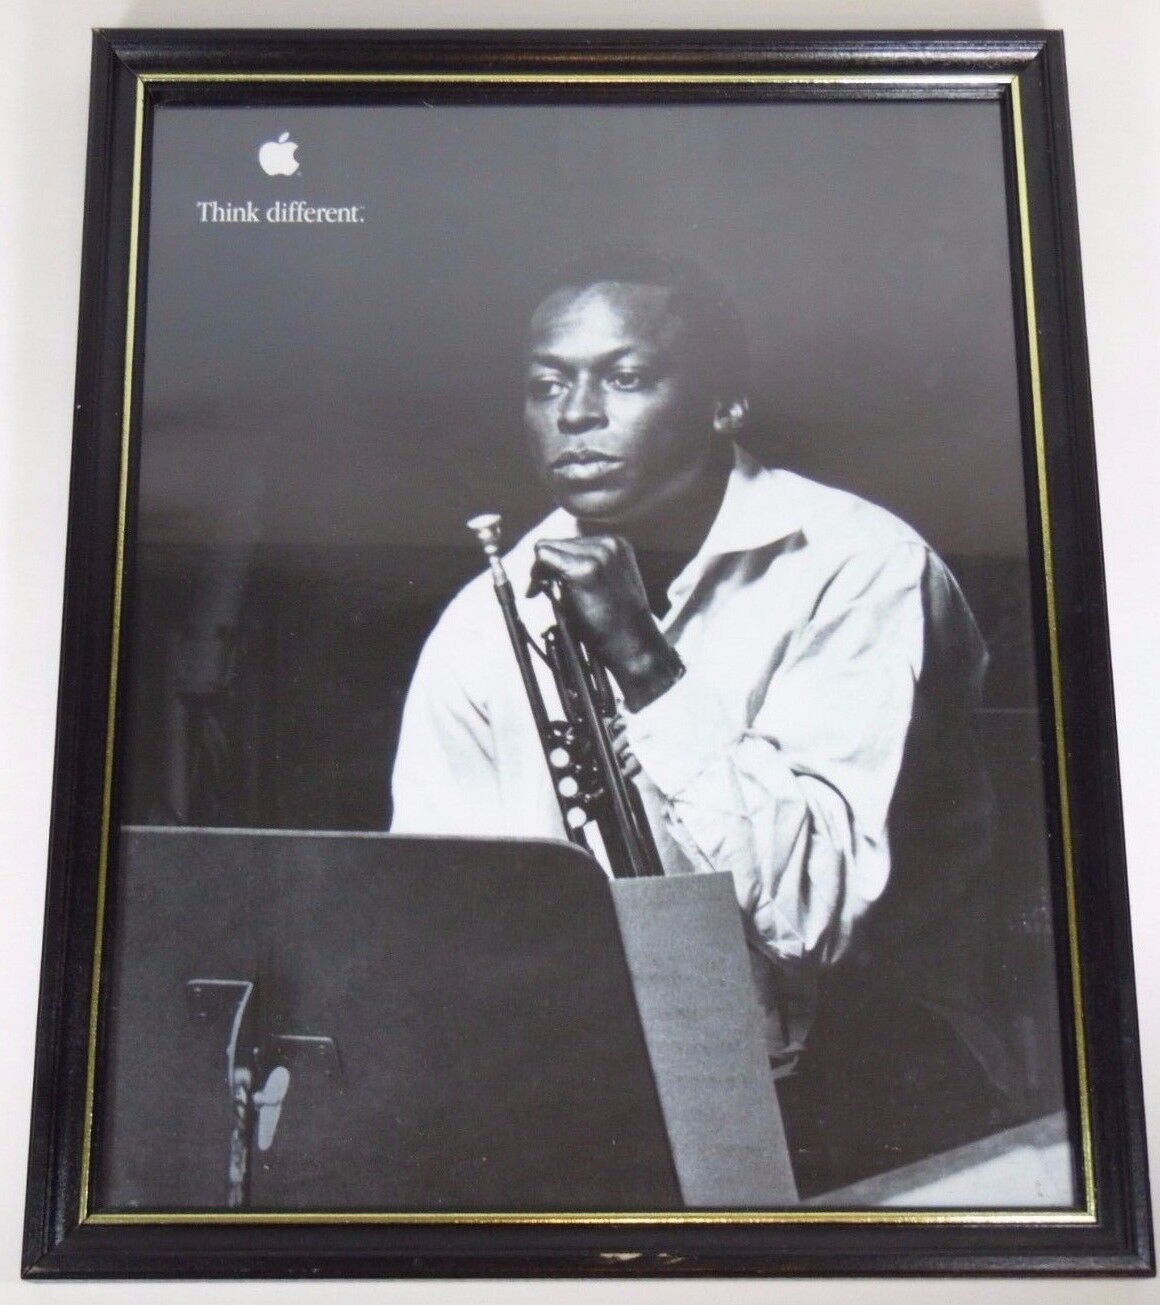 Vtg 1999 APPLE COMPUTERS THINK DIFFERENT MILES DAVIS 11x14 ADVERTISING POSTER